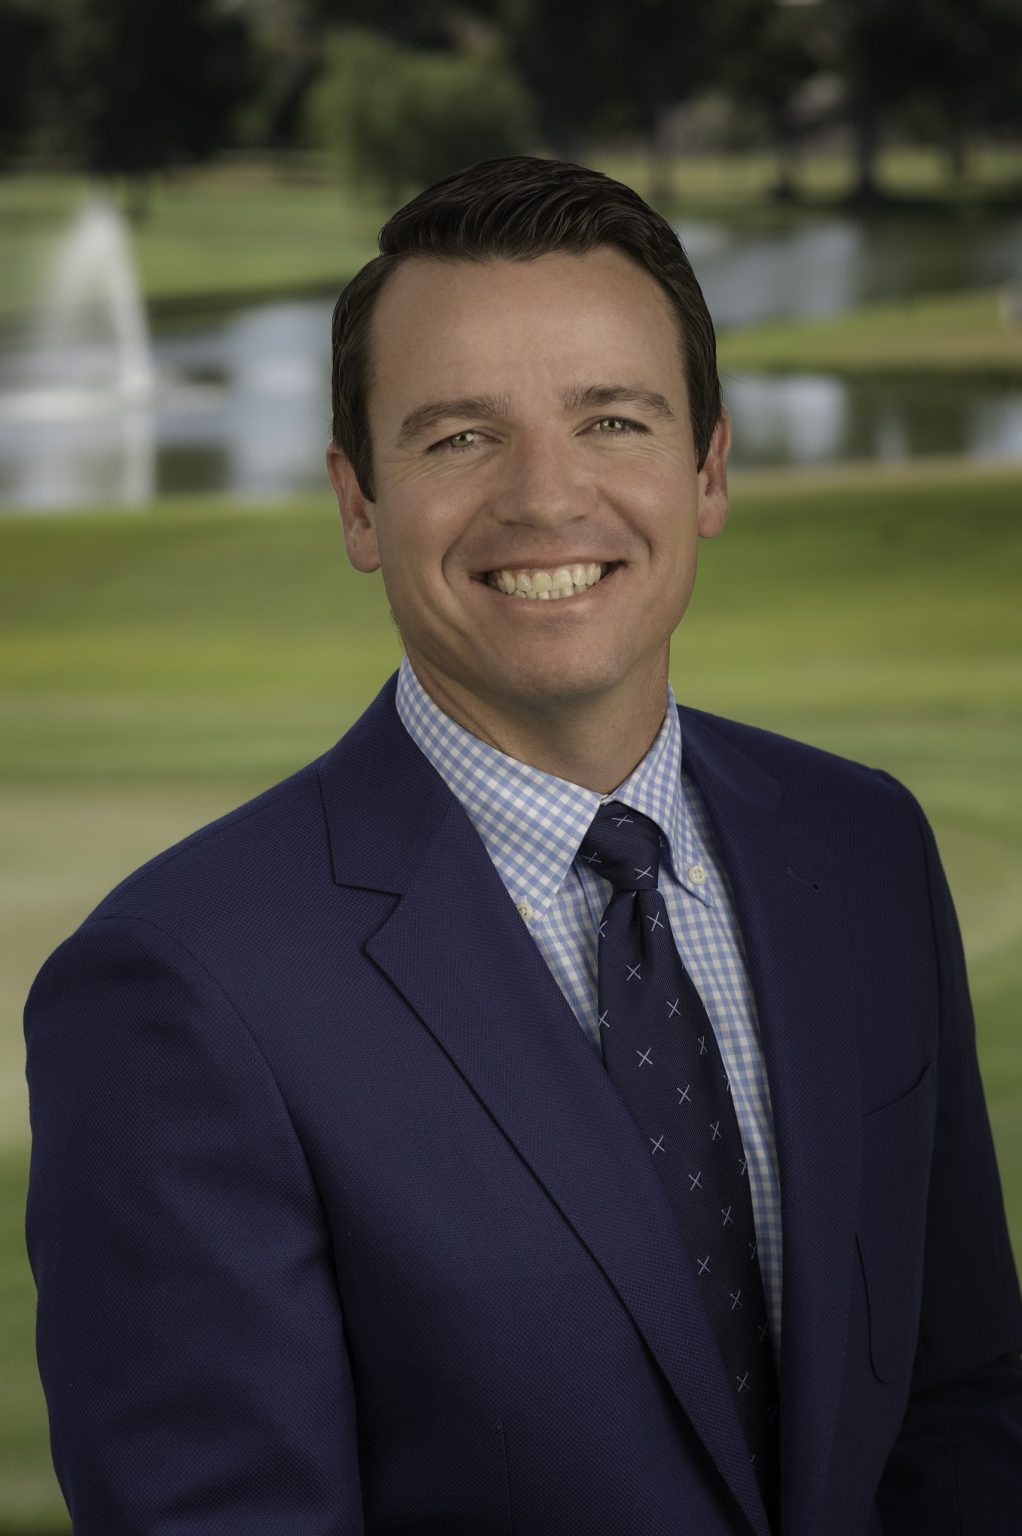 TUCSON CITY GOLF ADDS JUSTIN BUBSER AS DIRECTOR OF INSTRUCTION